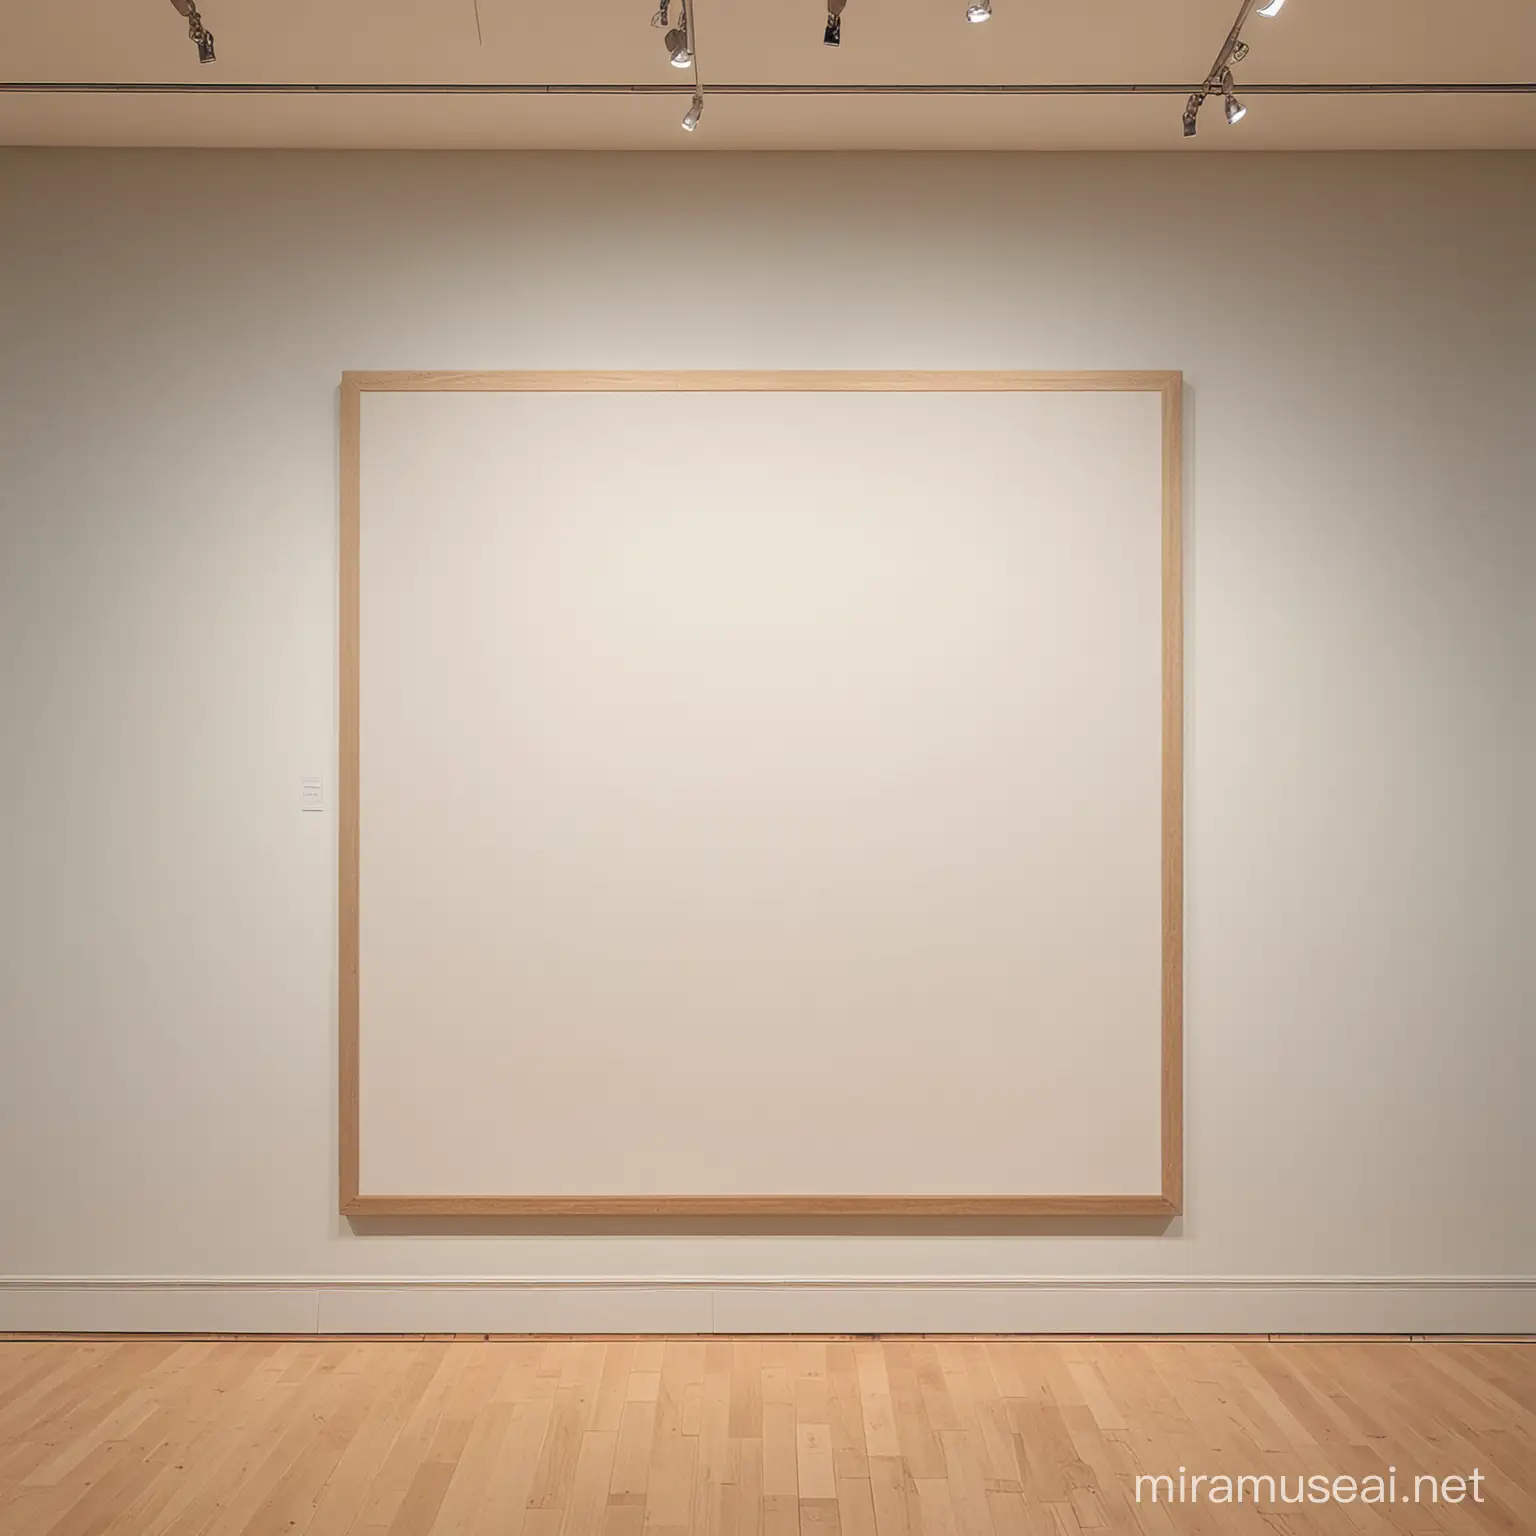 A big Blank square canvas on a museum wall